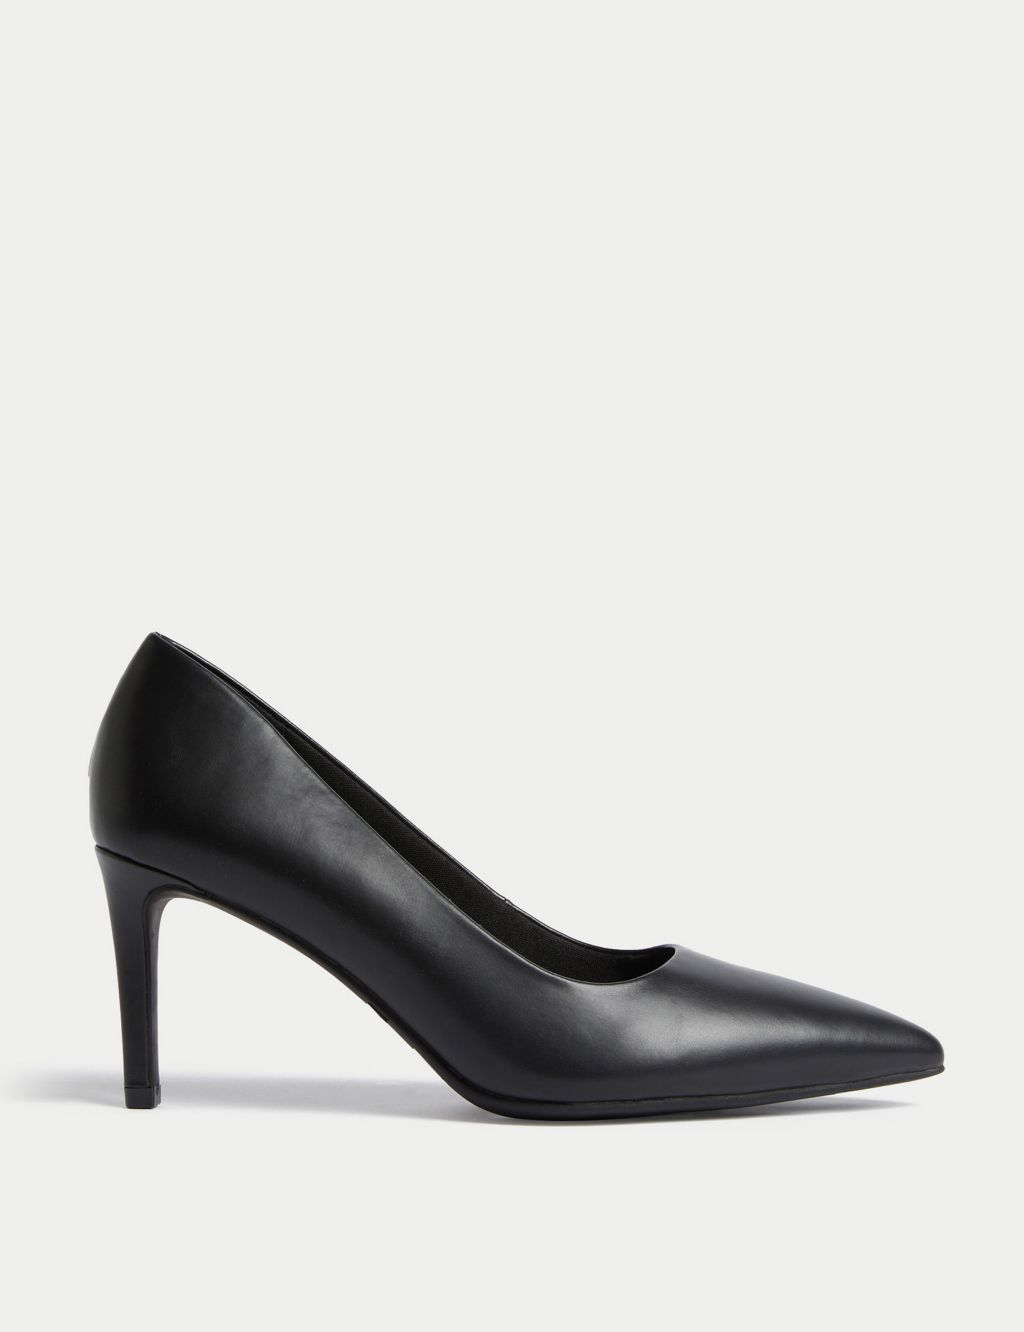 Stiletto Heel Pointed Court Shoes image 1